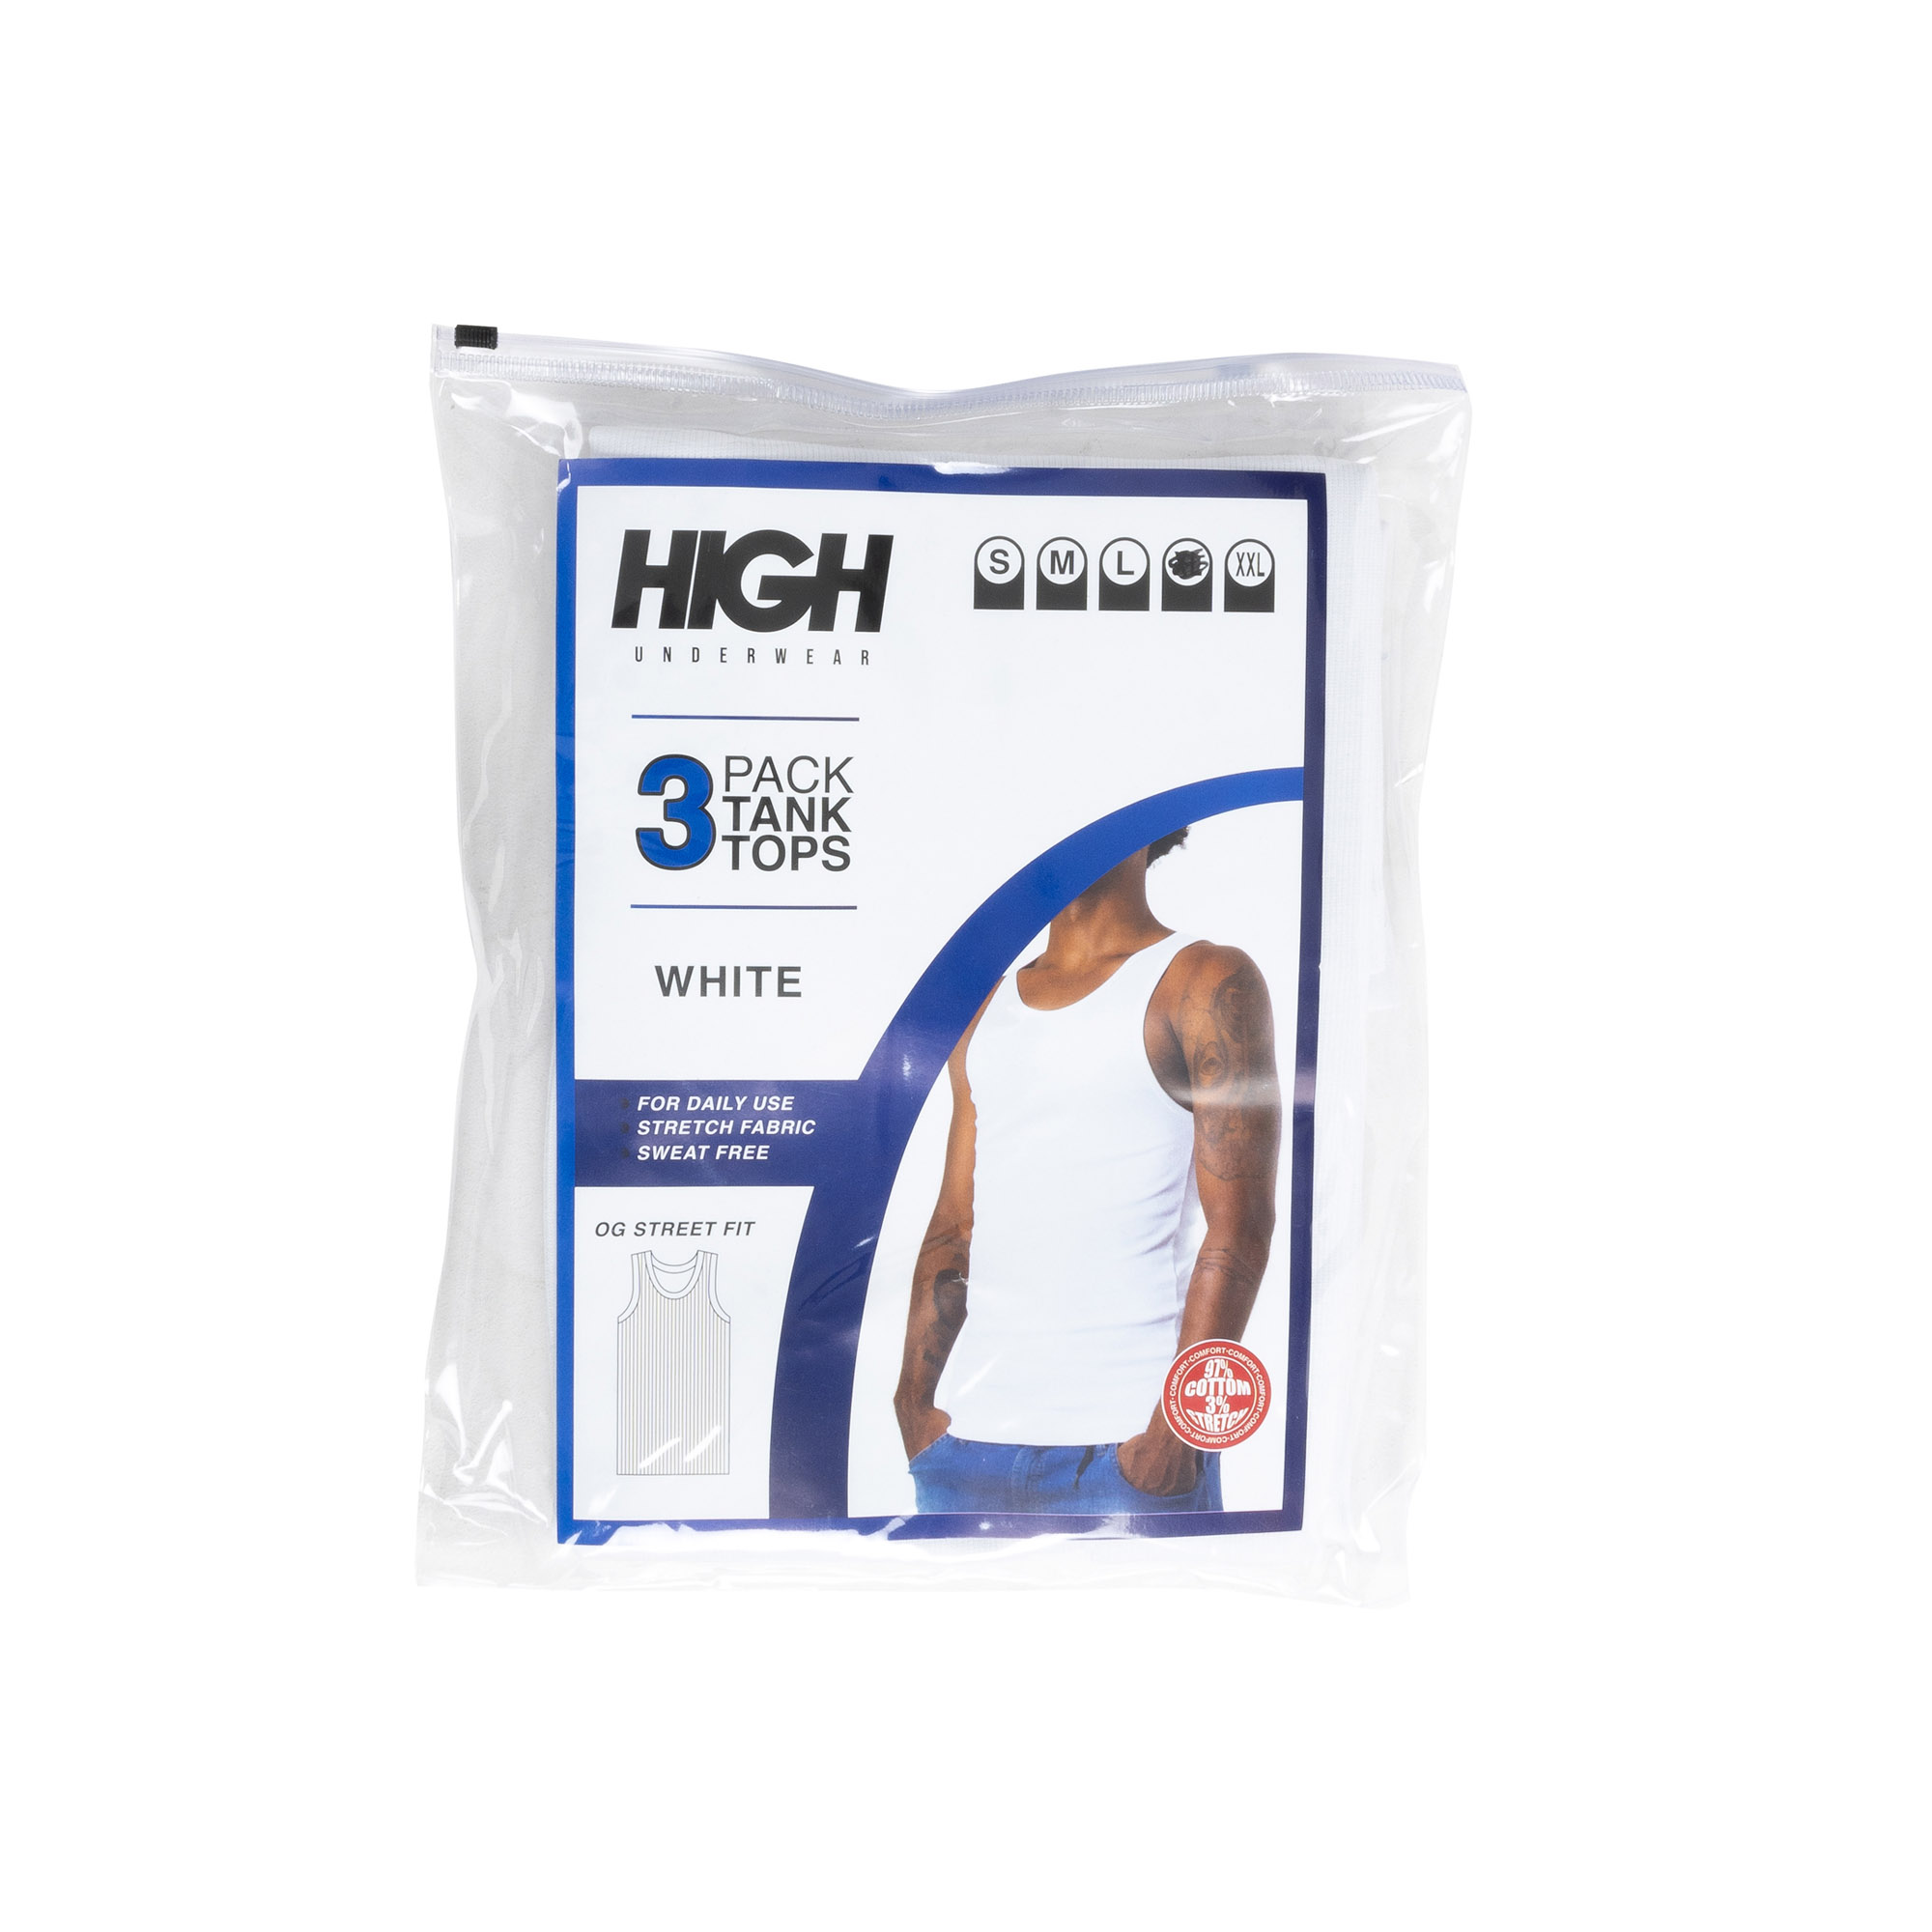 Tank Top Pack White – HIGH Company®